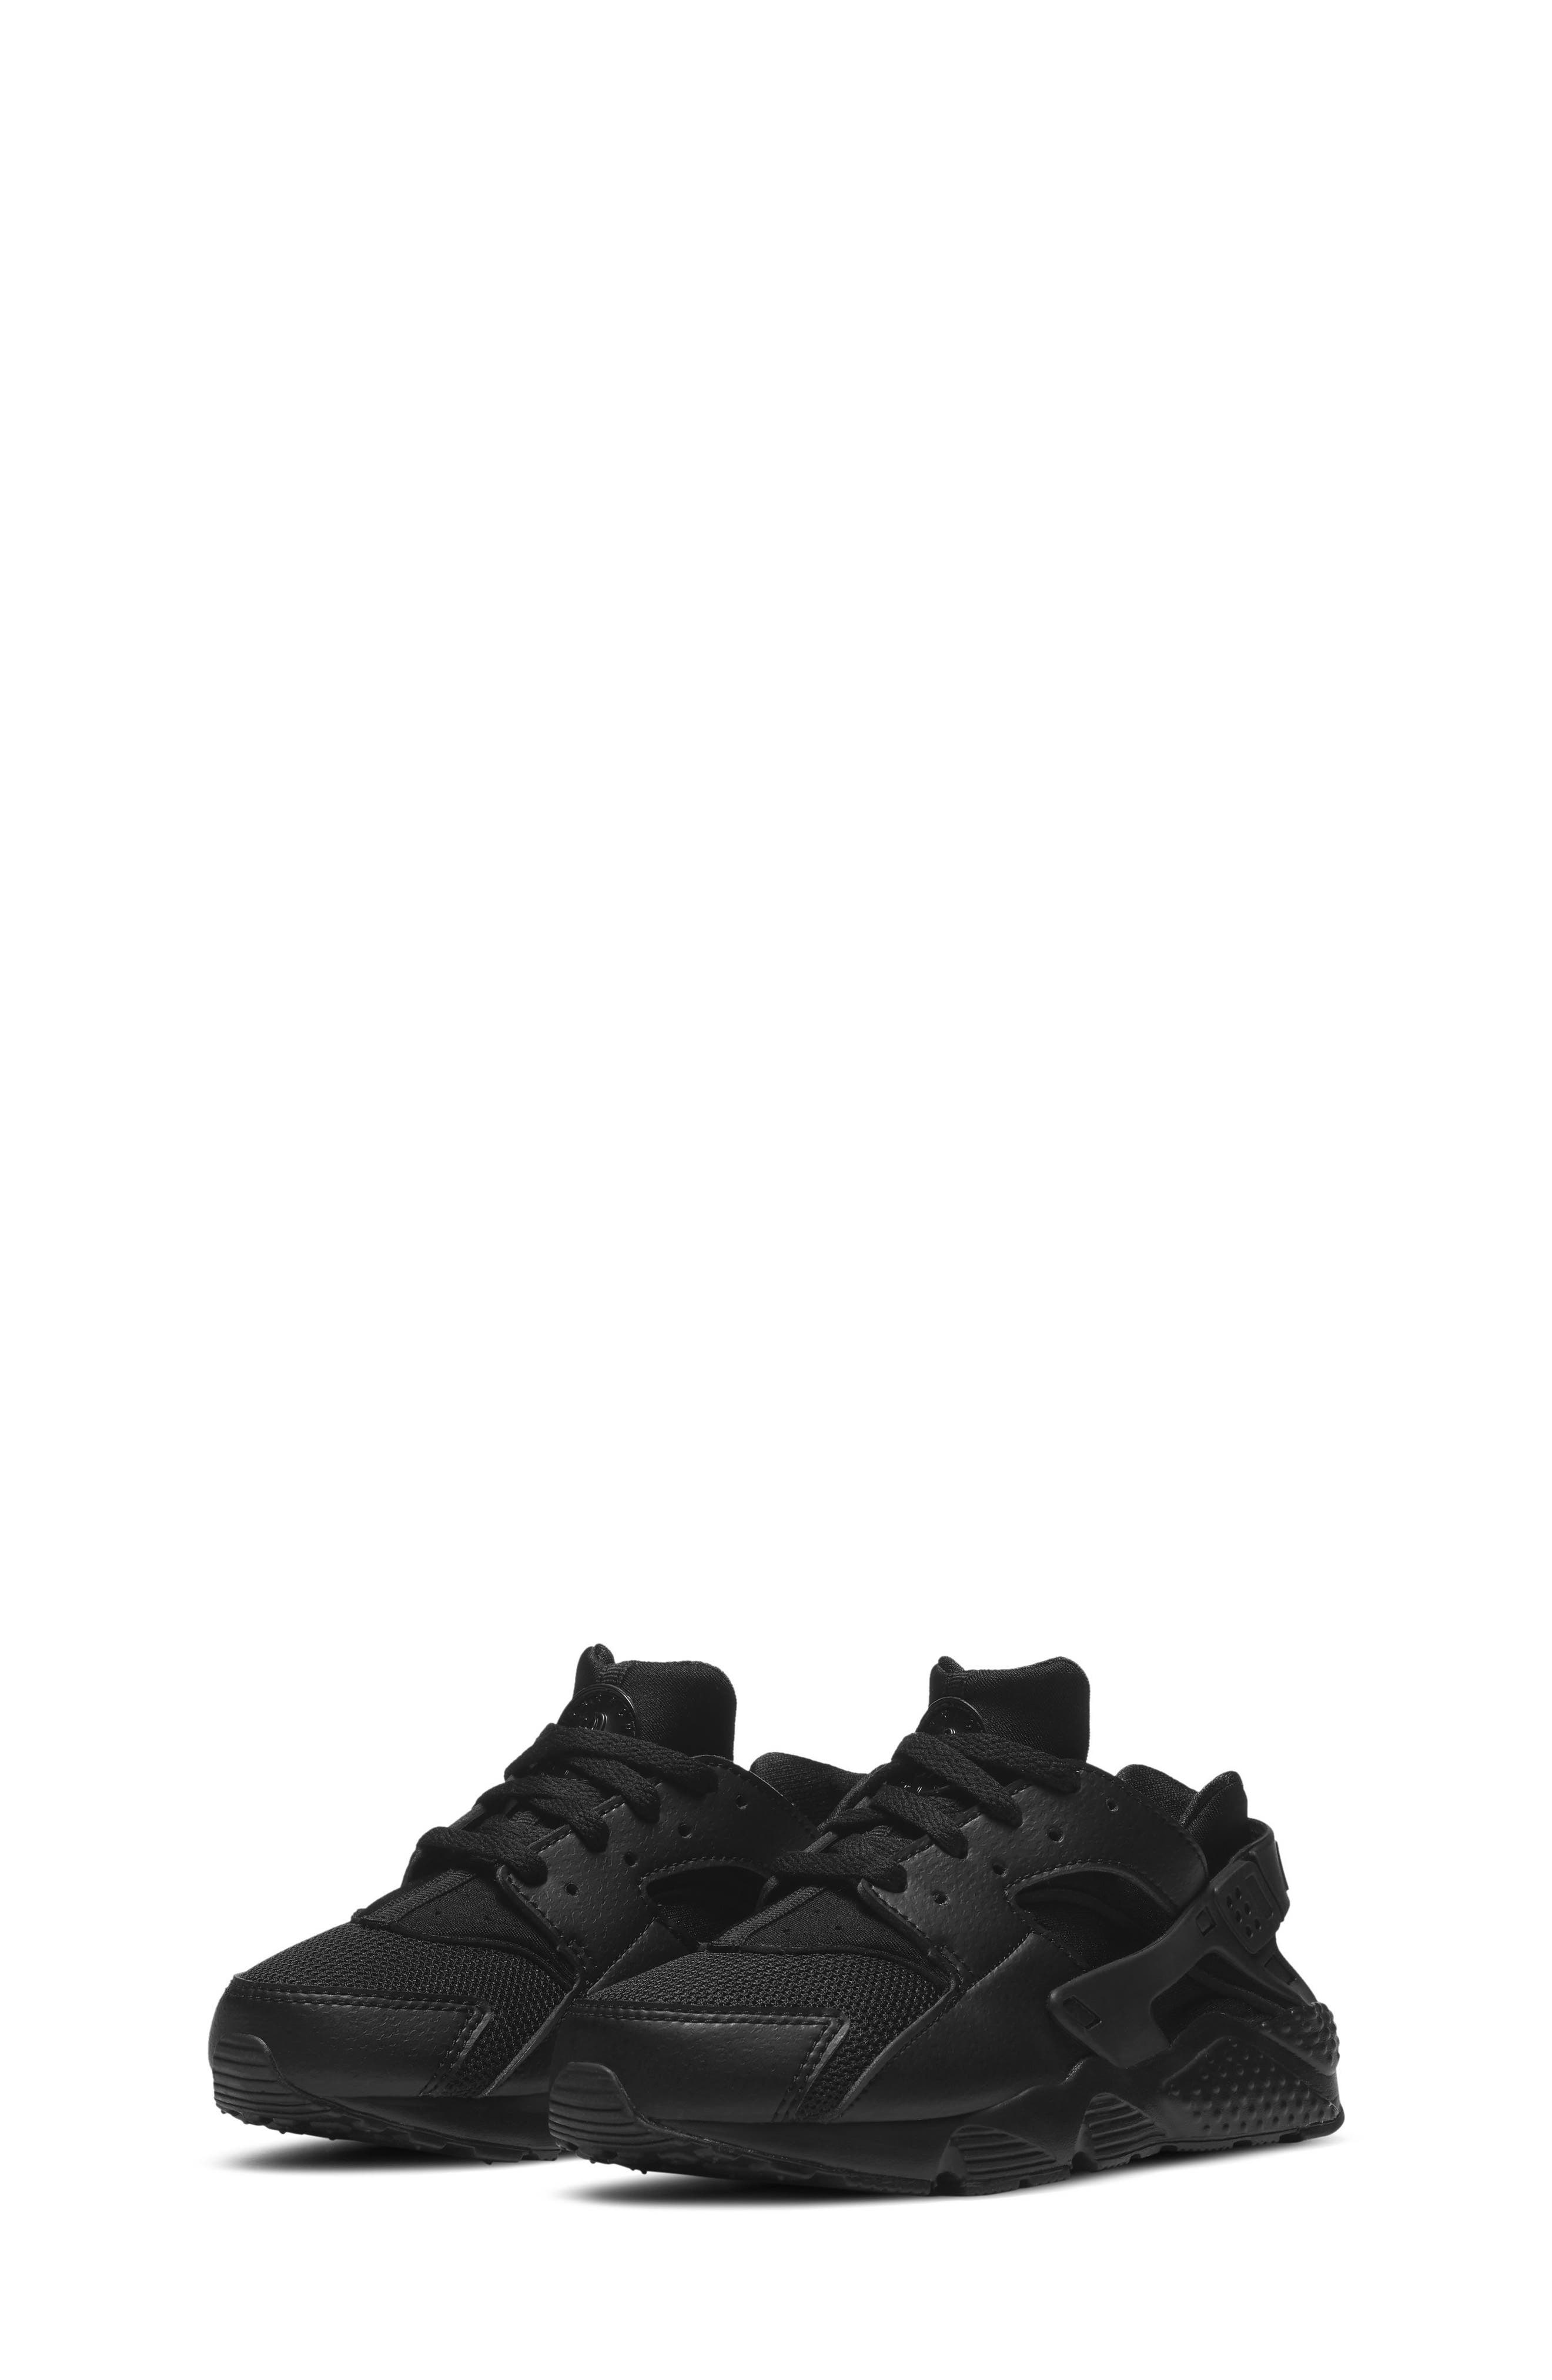 huaraches | Nordstrom